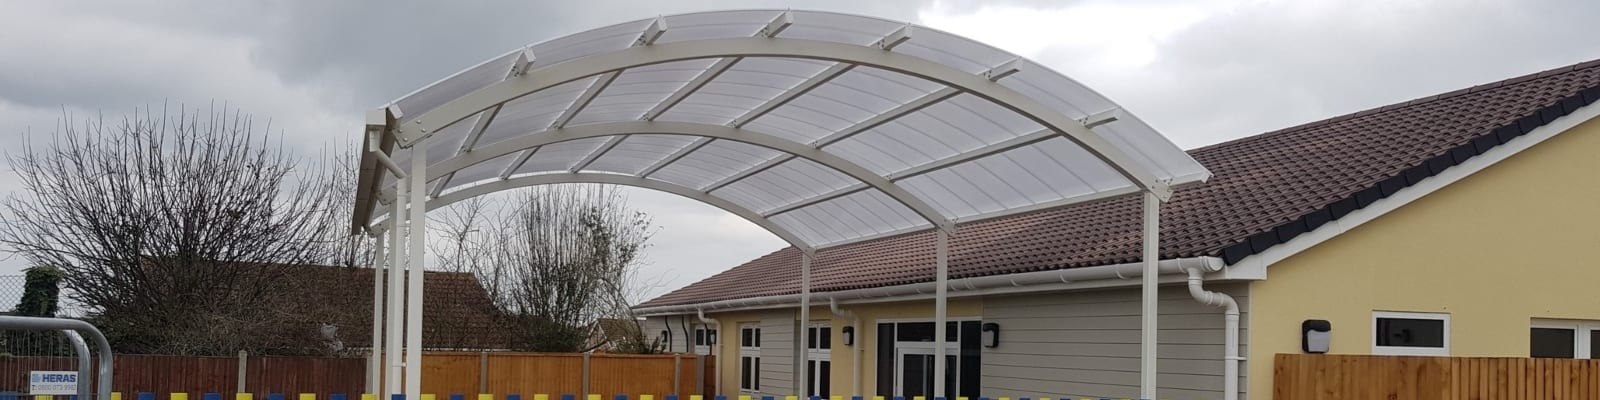 Cann Hall Primary School Shelter